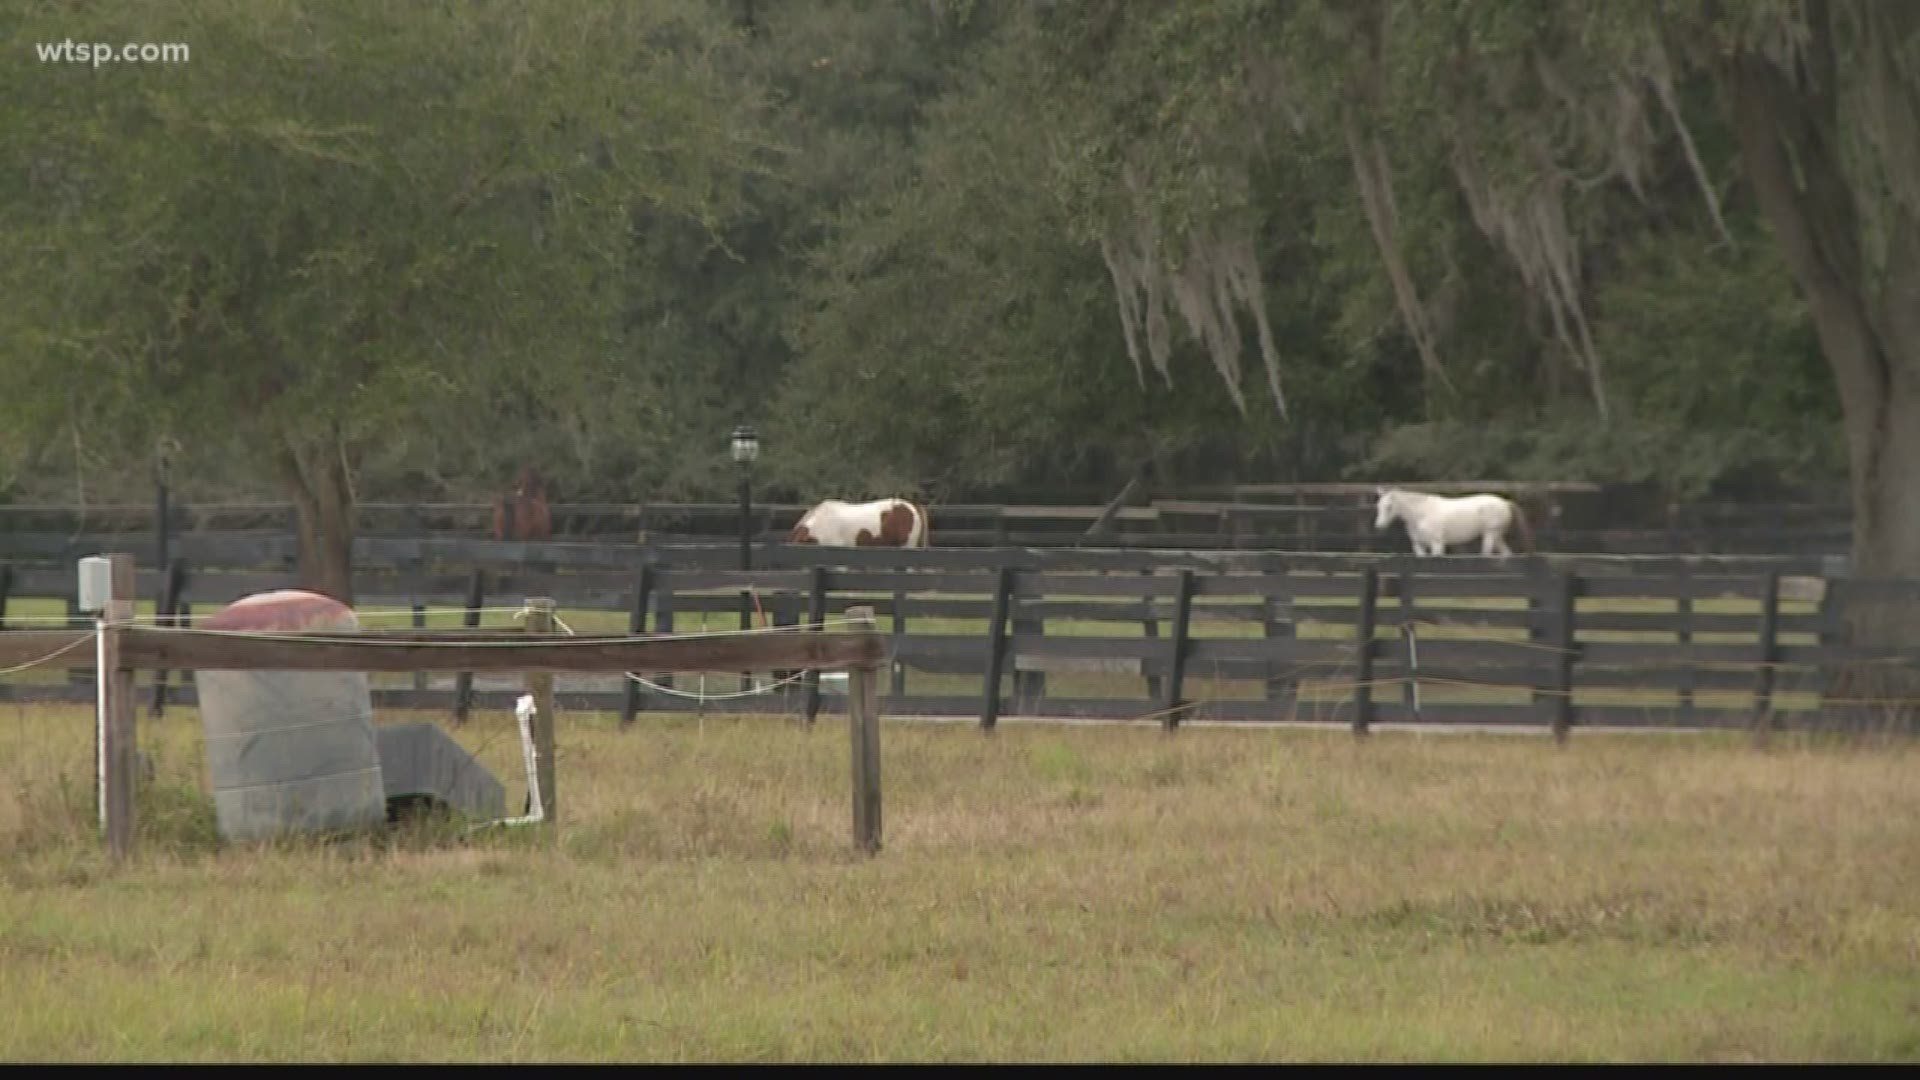 One woman is installing cameras and motion lights after catching a stranger taking pictures of horses in the Plant City area. https://bit.ly/2S4Jod4